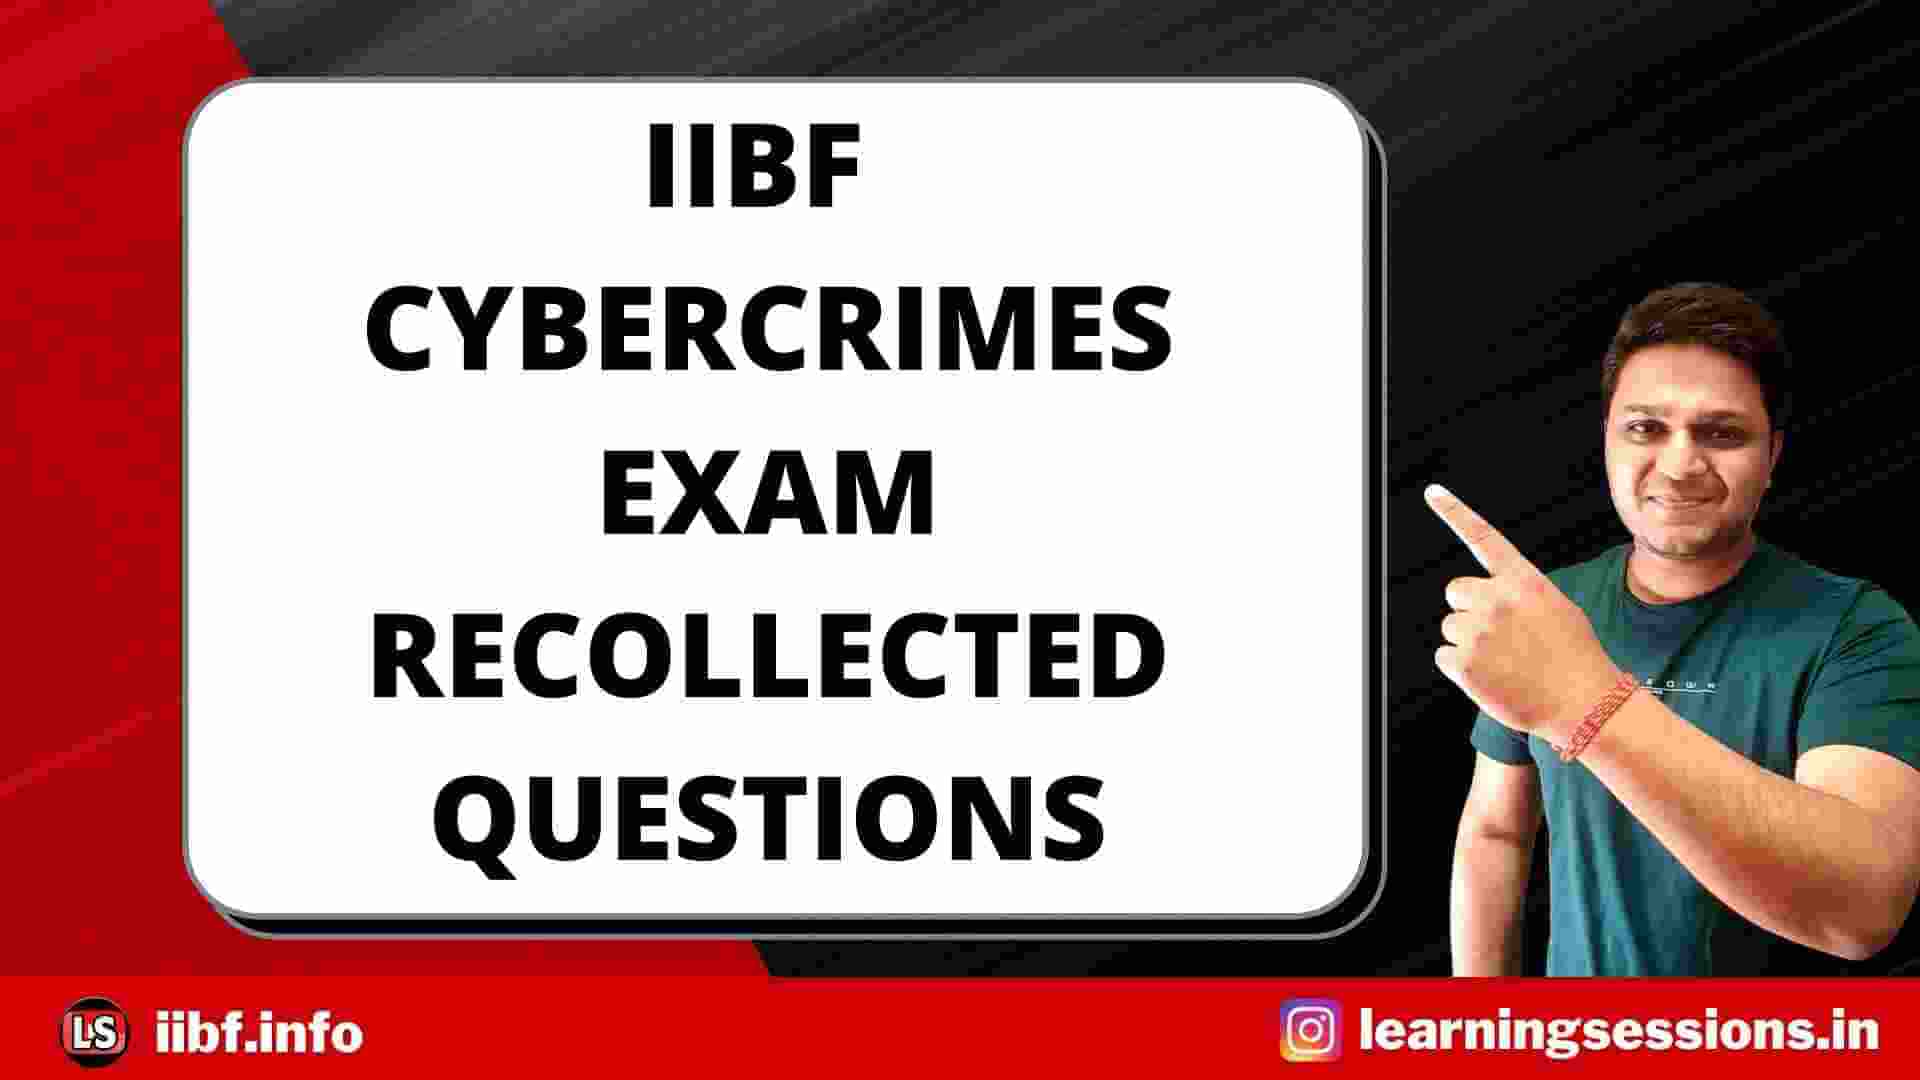 IIBF CYBER CRIMES EXAM RECOLLECTED QUESTIONS FOR 2022